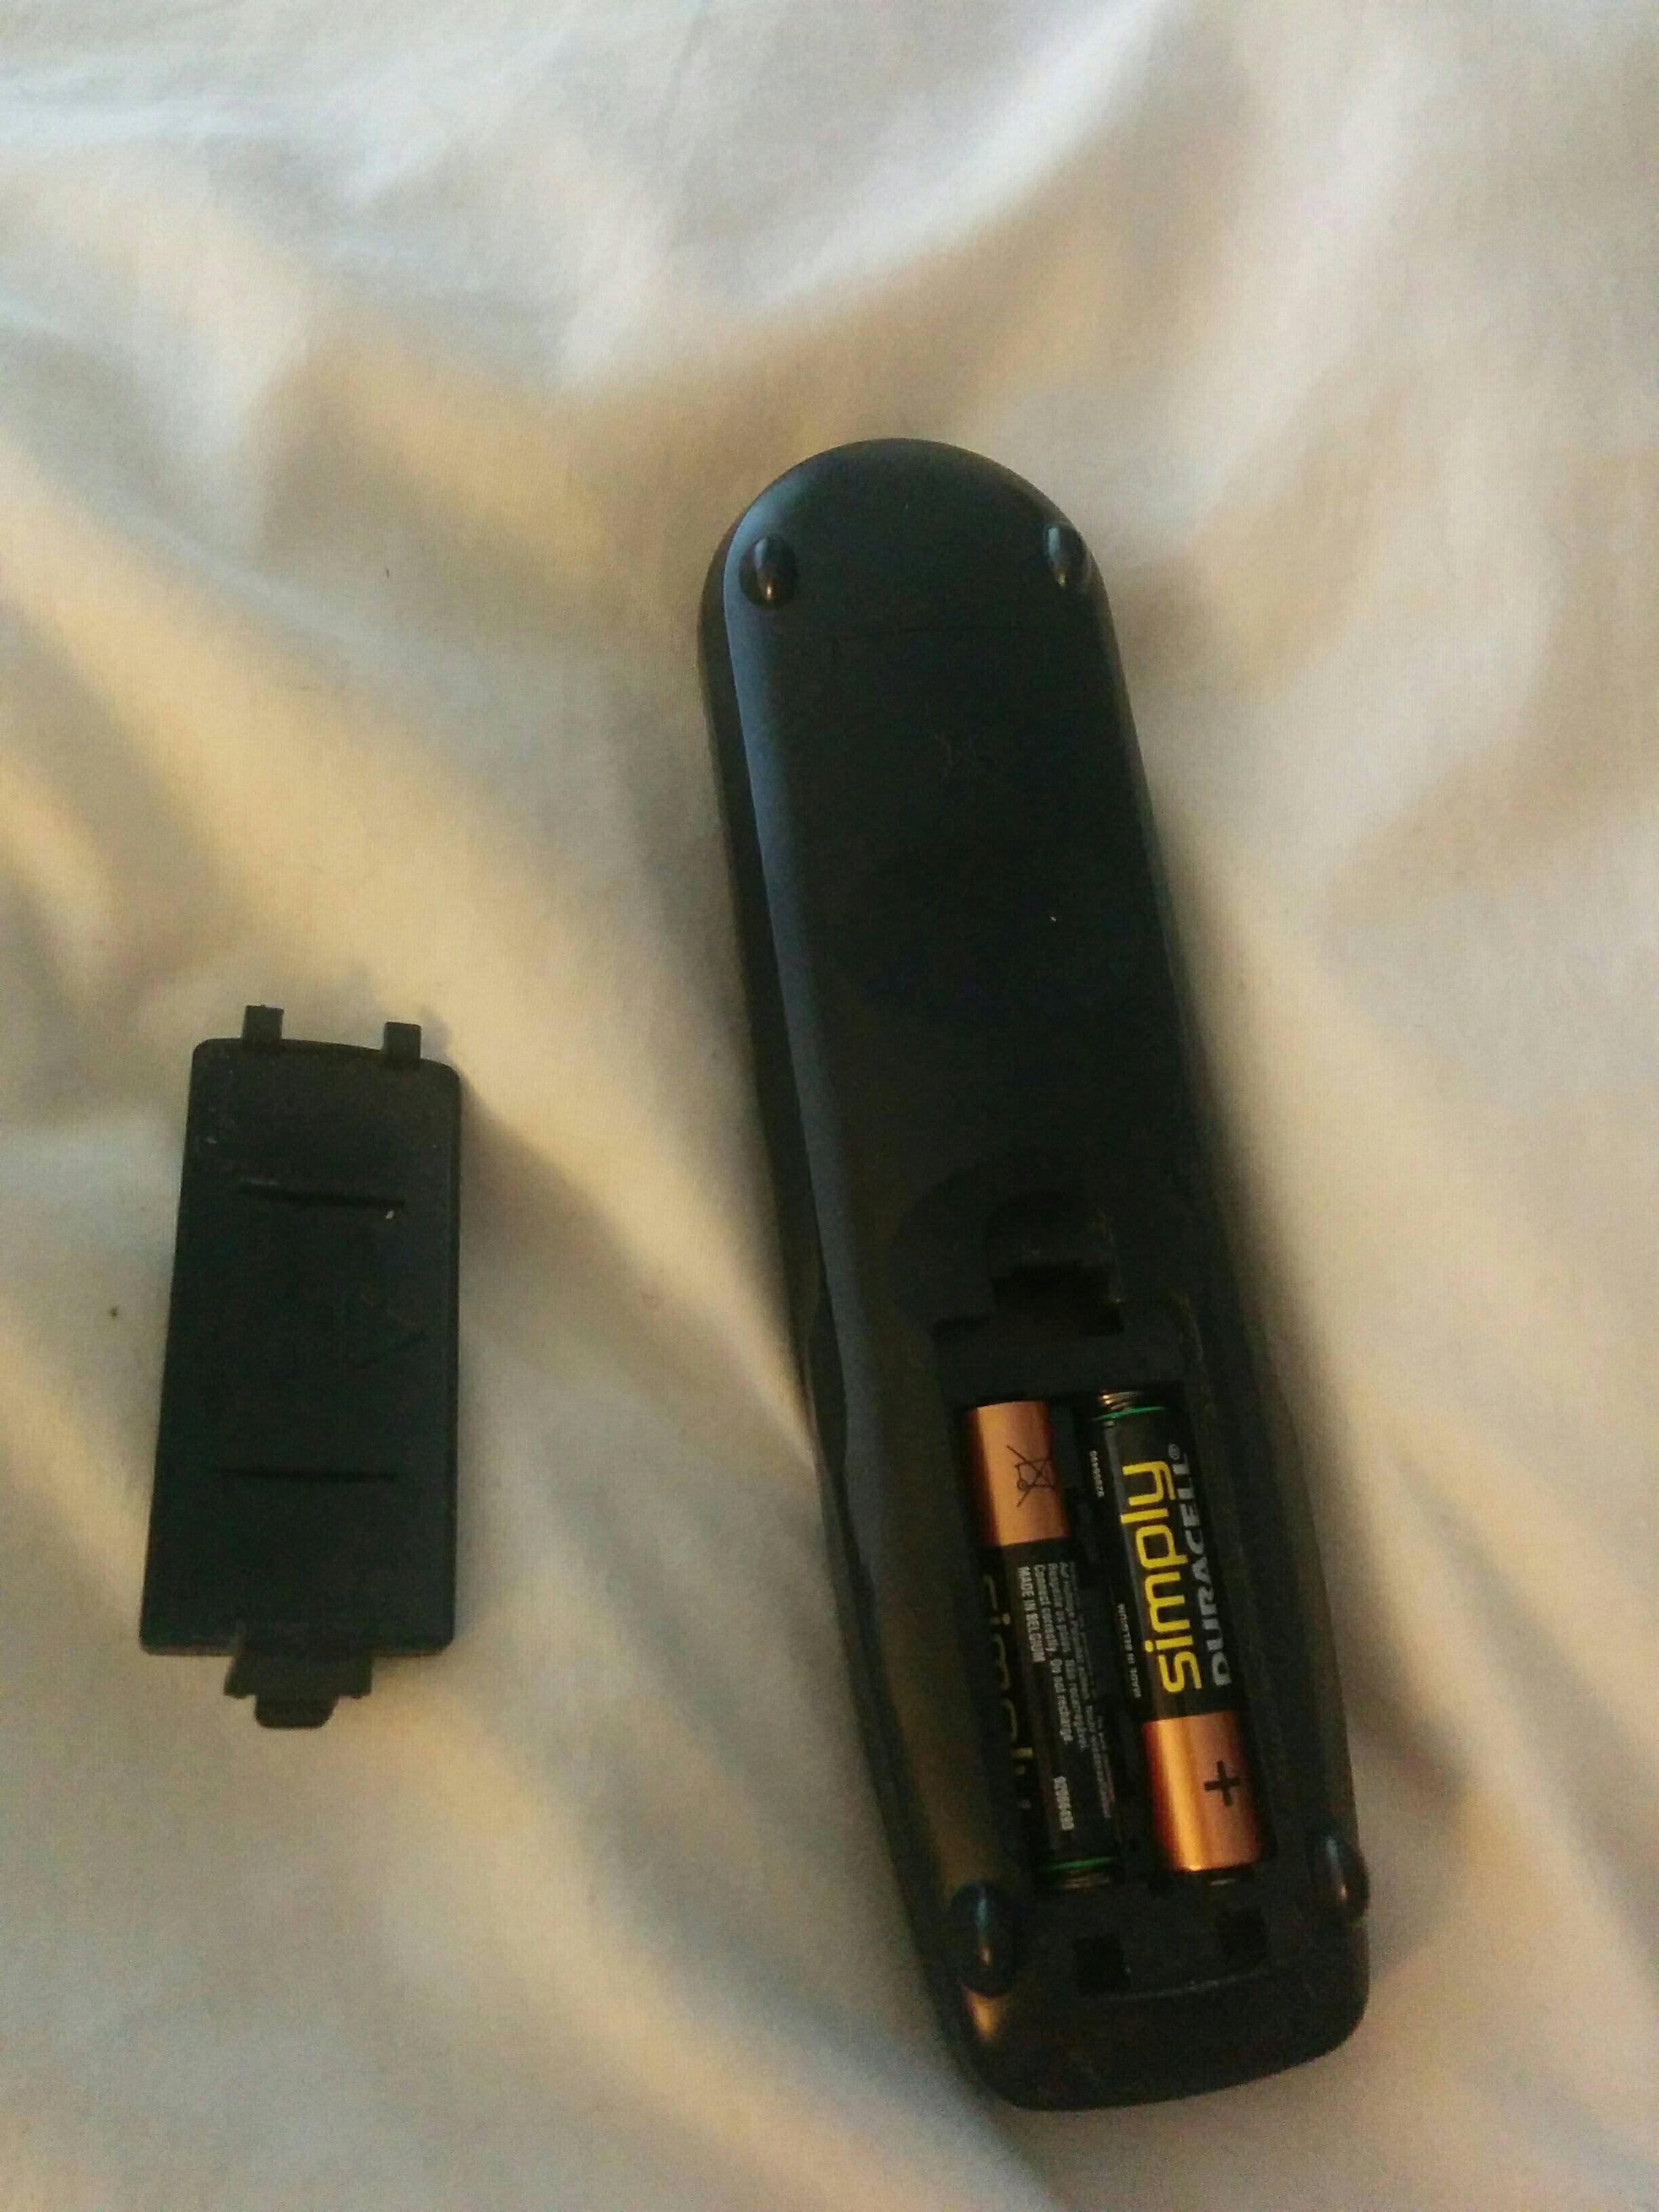 remote control and battery cover